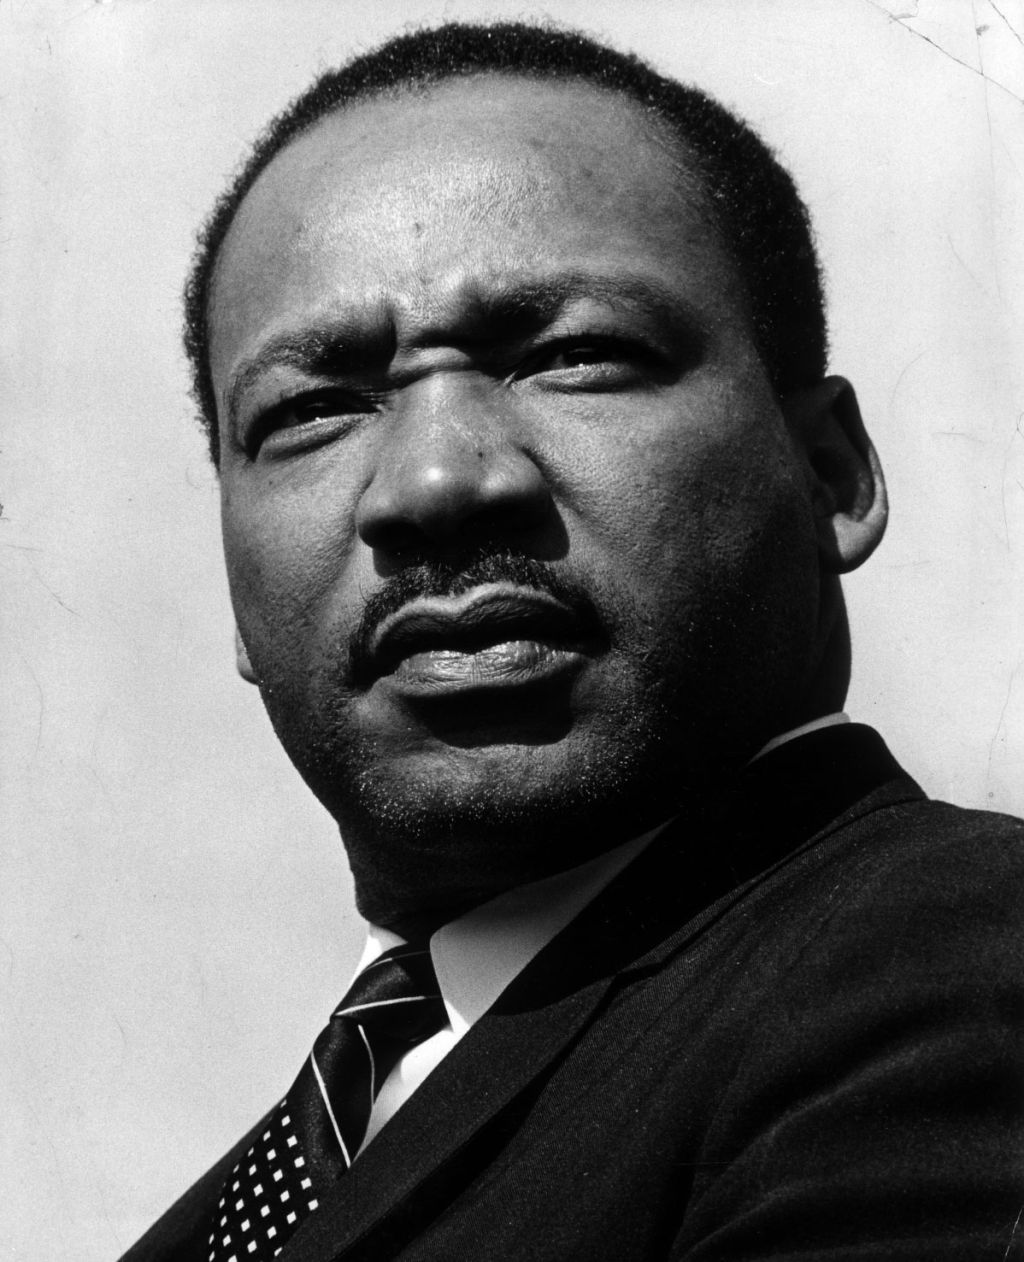 Shown is Martin Luther King Jr. during a 1967 visit to Minneapolis. Minneapolis Star (now Star Tribune) photo by staff photographer Charles Bjorgen.